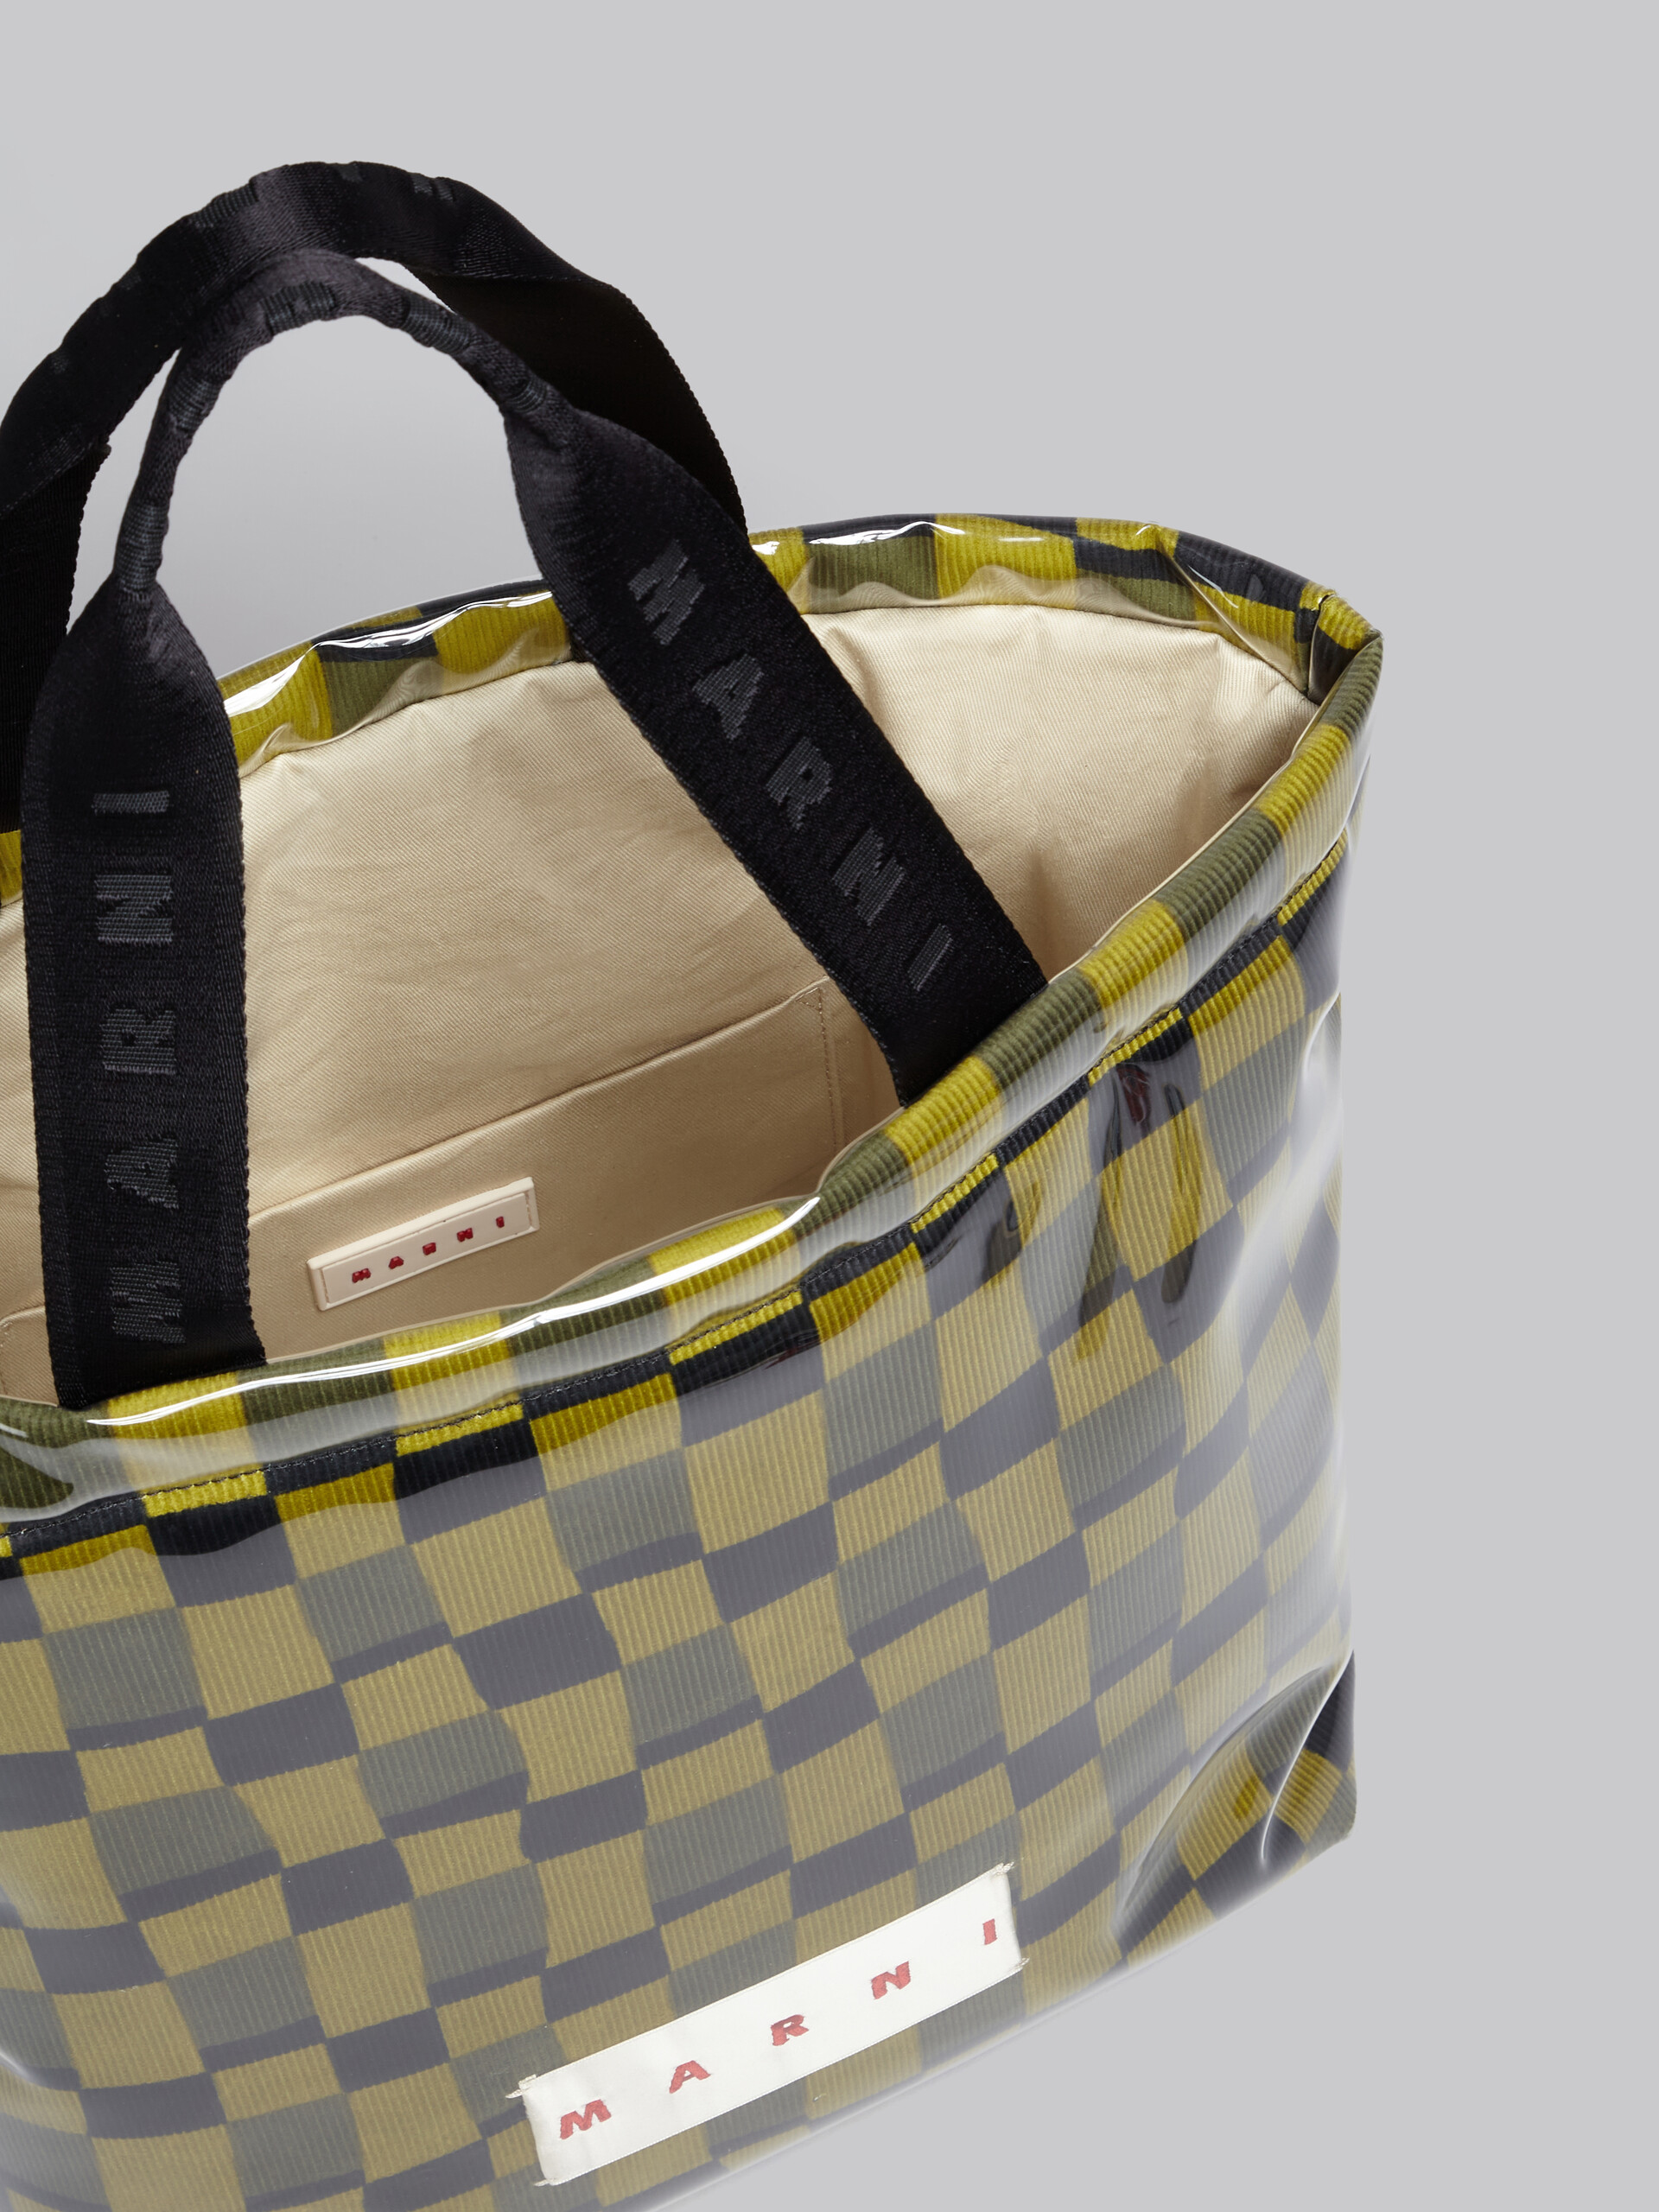 Yellow chequerboard tote with clear wrap - Shopping Bags - Image 4